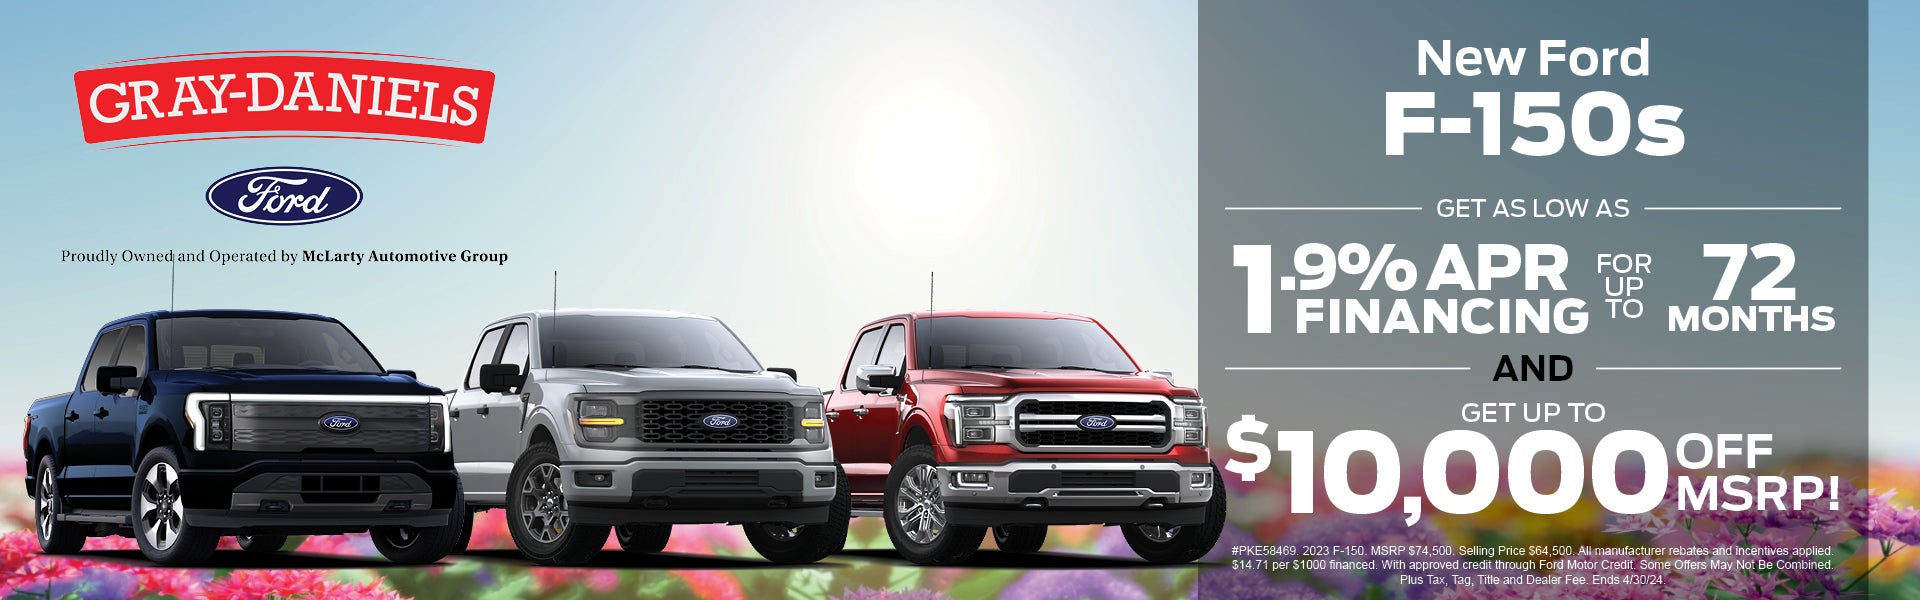 New F-150s 1.9% APR Financing And $10,000 Off MSRP